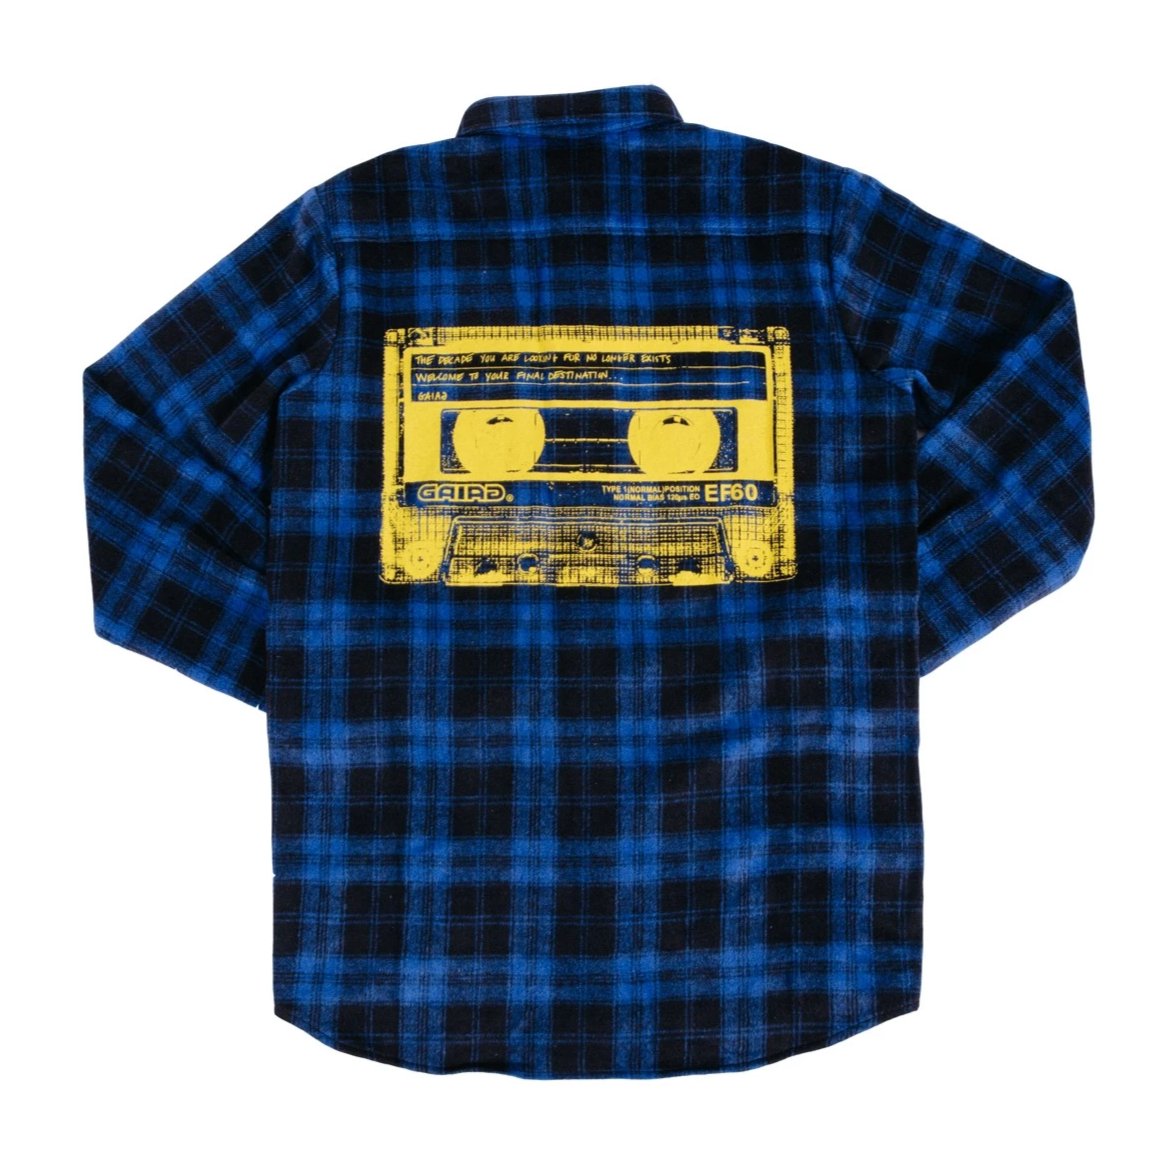 "THE DECADE YOU ARE LOOKING FOR..." PLAID FLANNEL SHIRT